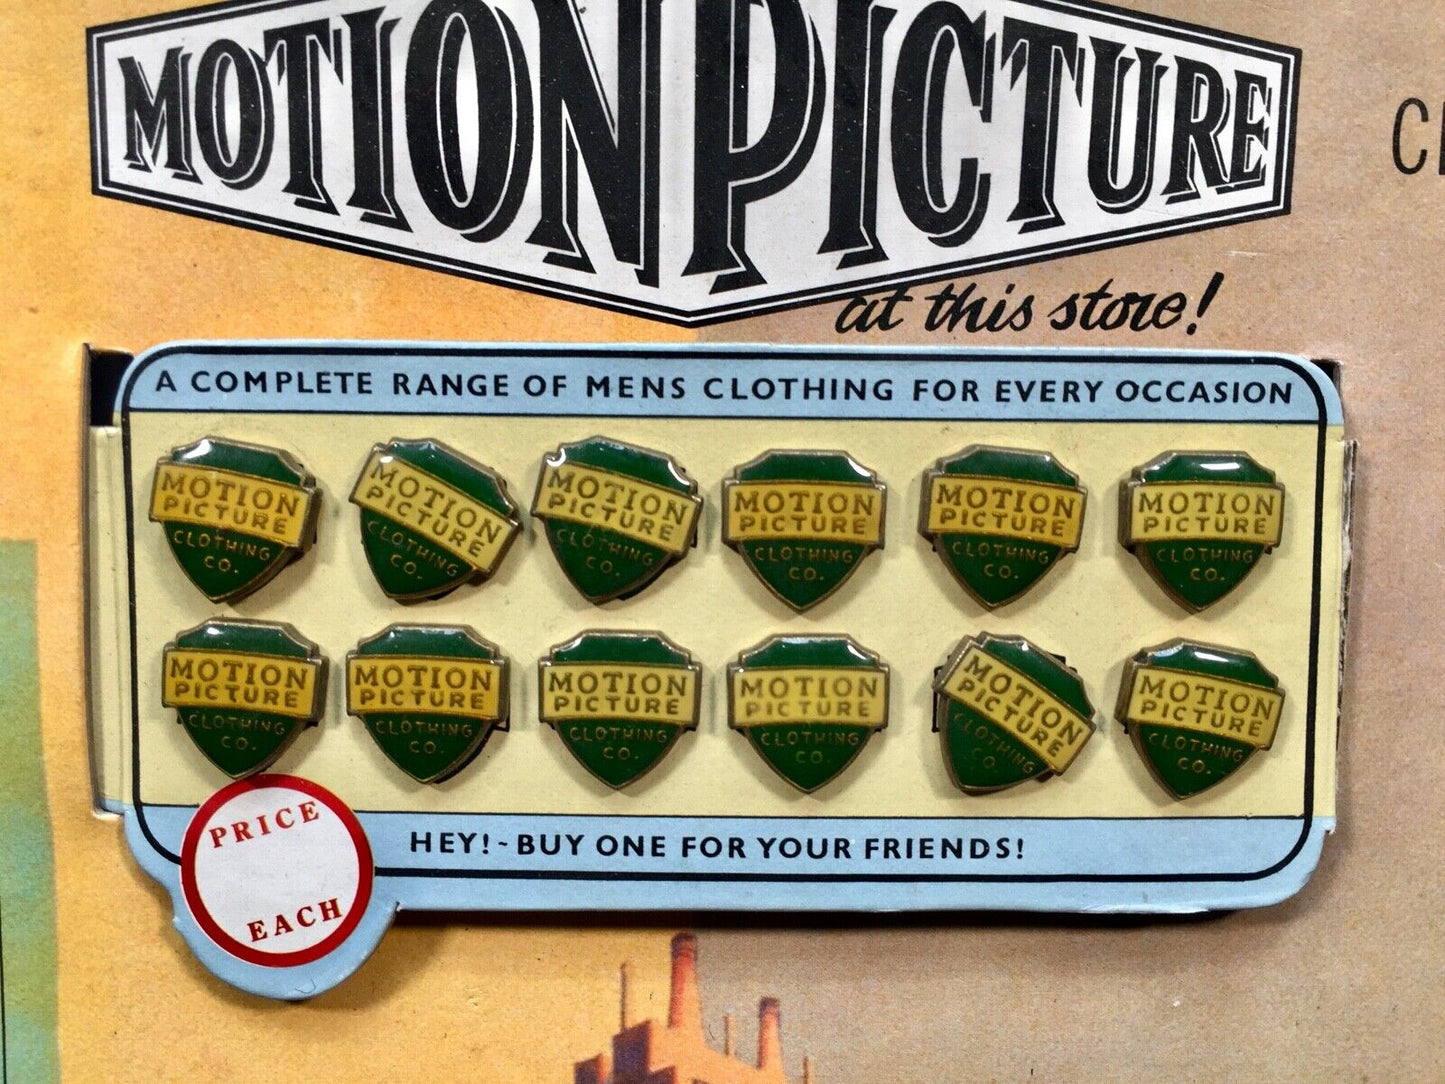 Antique Advertising - Shop Counter Display Showcard for Motion Picture Clothing